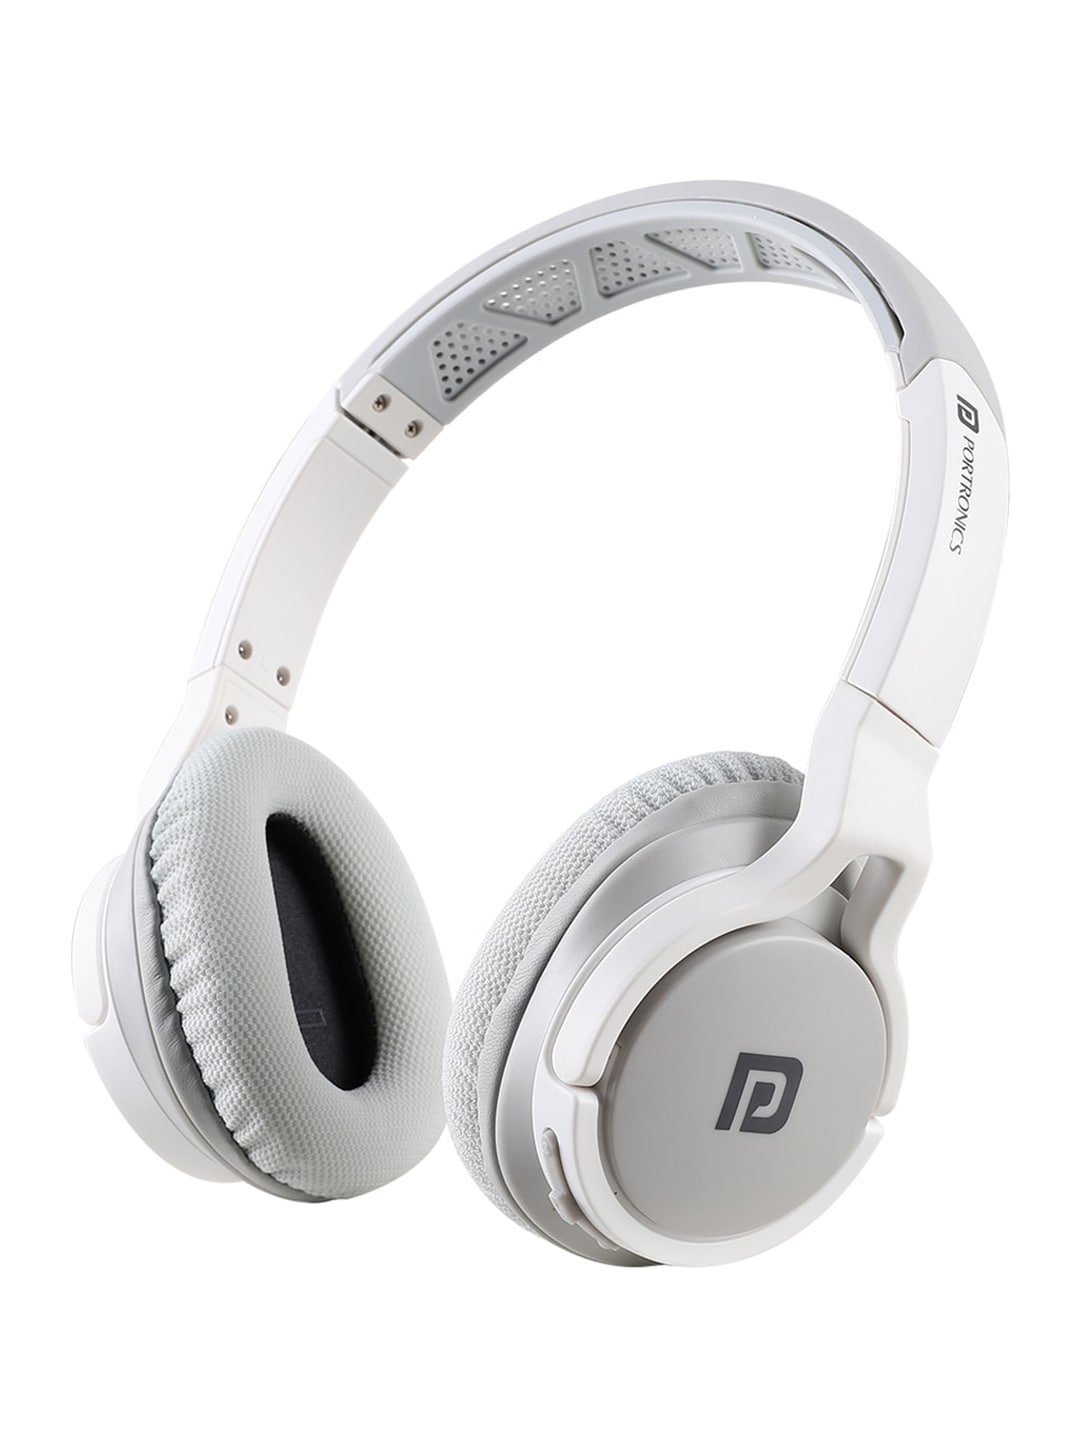 Portronics Unisex White Solid Muffs M1 Wireless Bluetooth Over-Ear Headphone Price in India